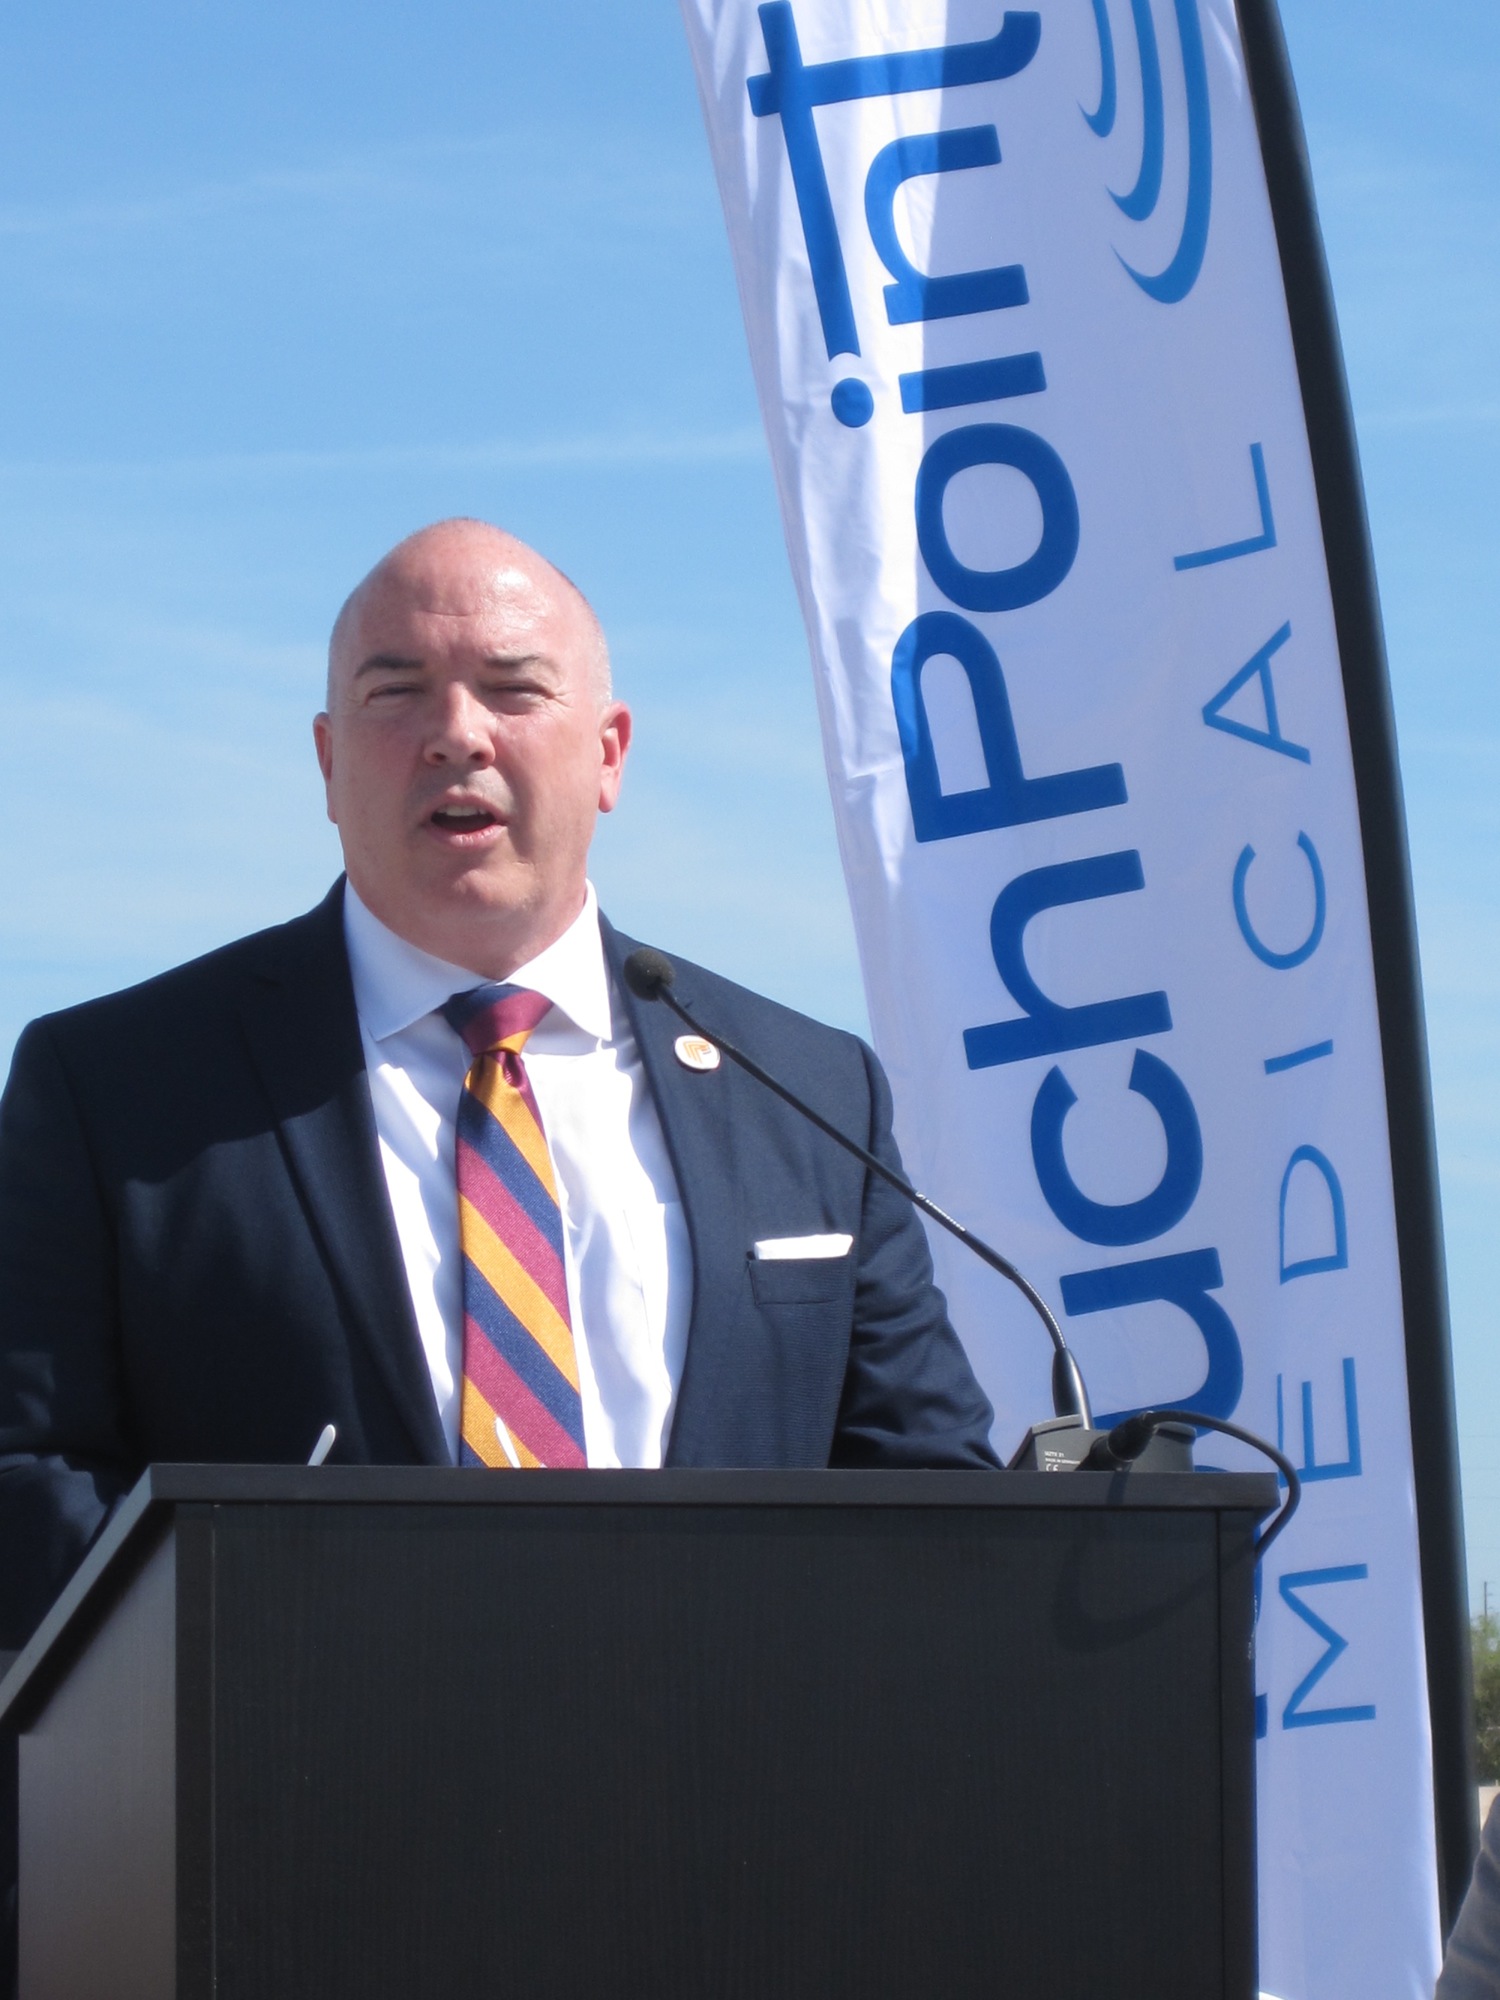 Brian Hartz. Pasco County EDC President and CEO Bill Cronin spoke at the groundbreaking of TouchPoint Medical's new headquarters in Odessa.